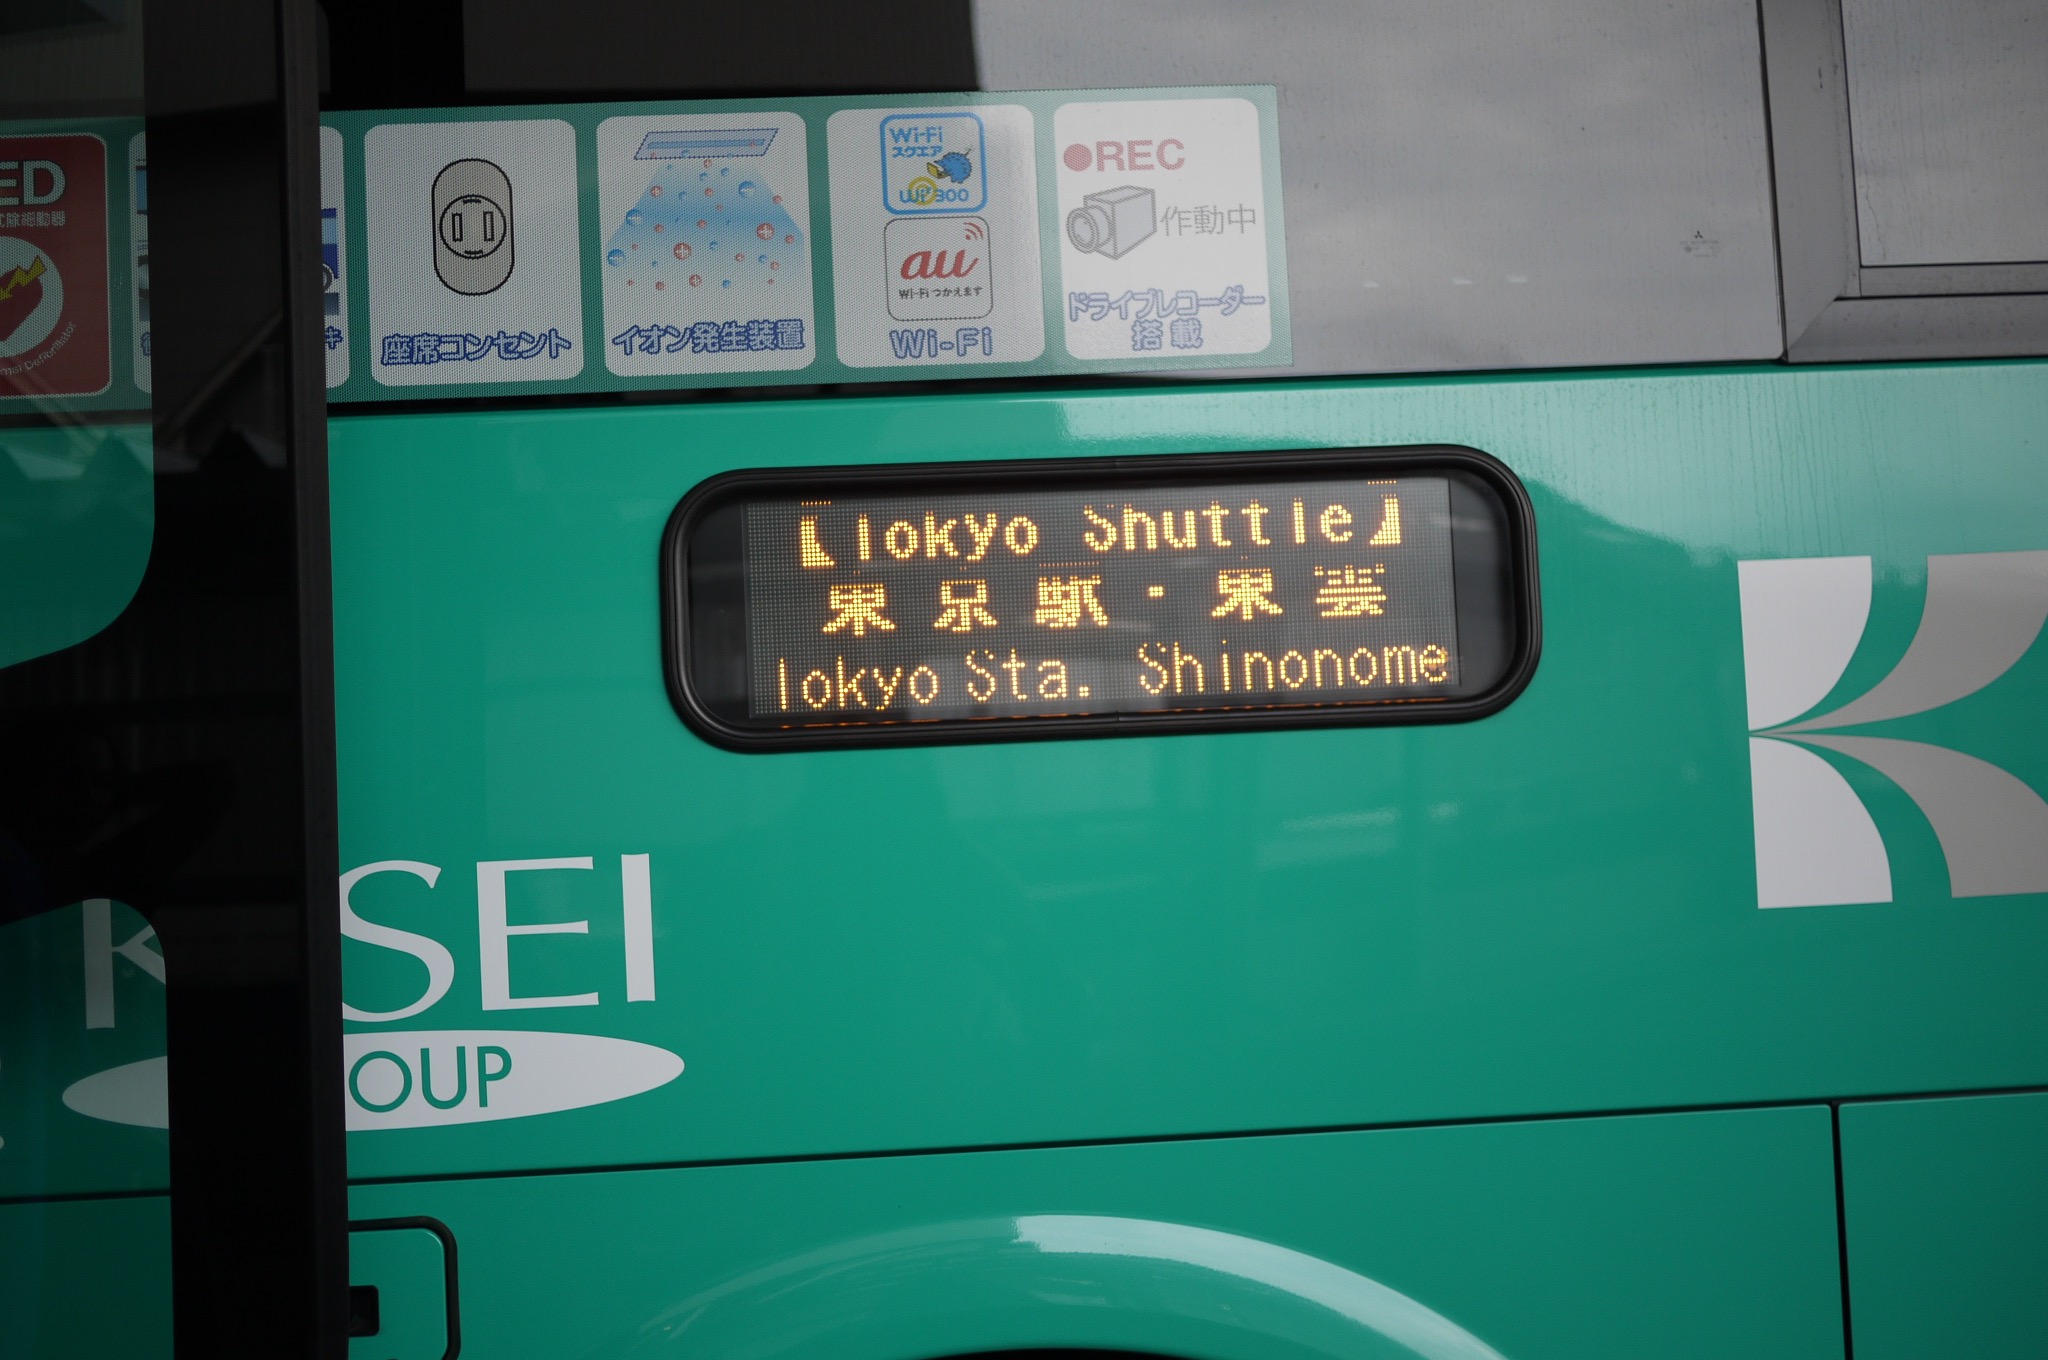 One of the many Tokyo Shuttles